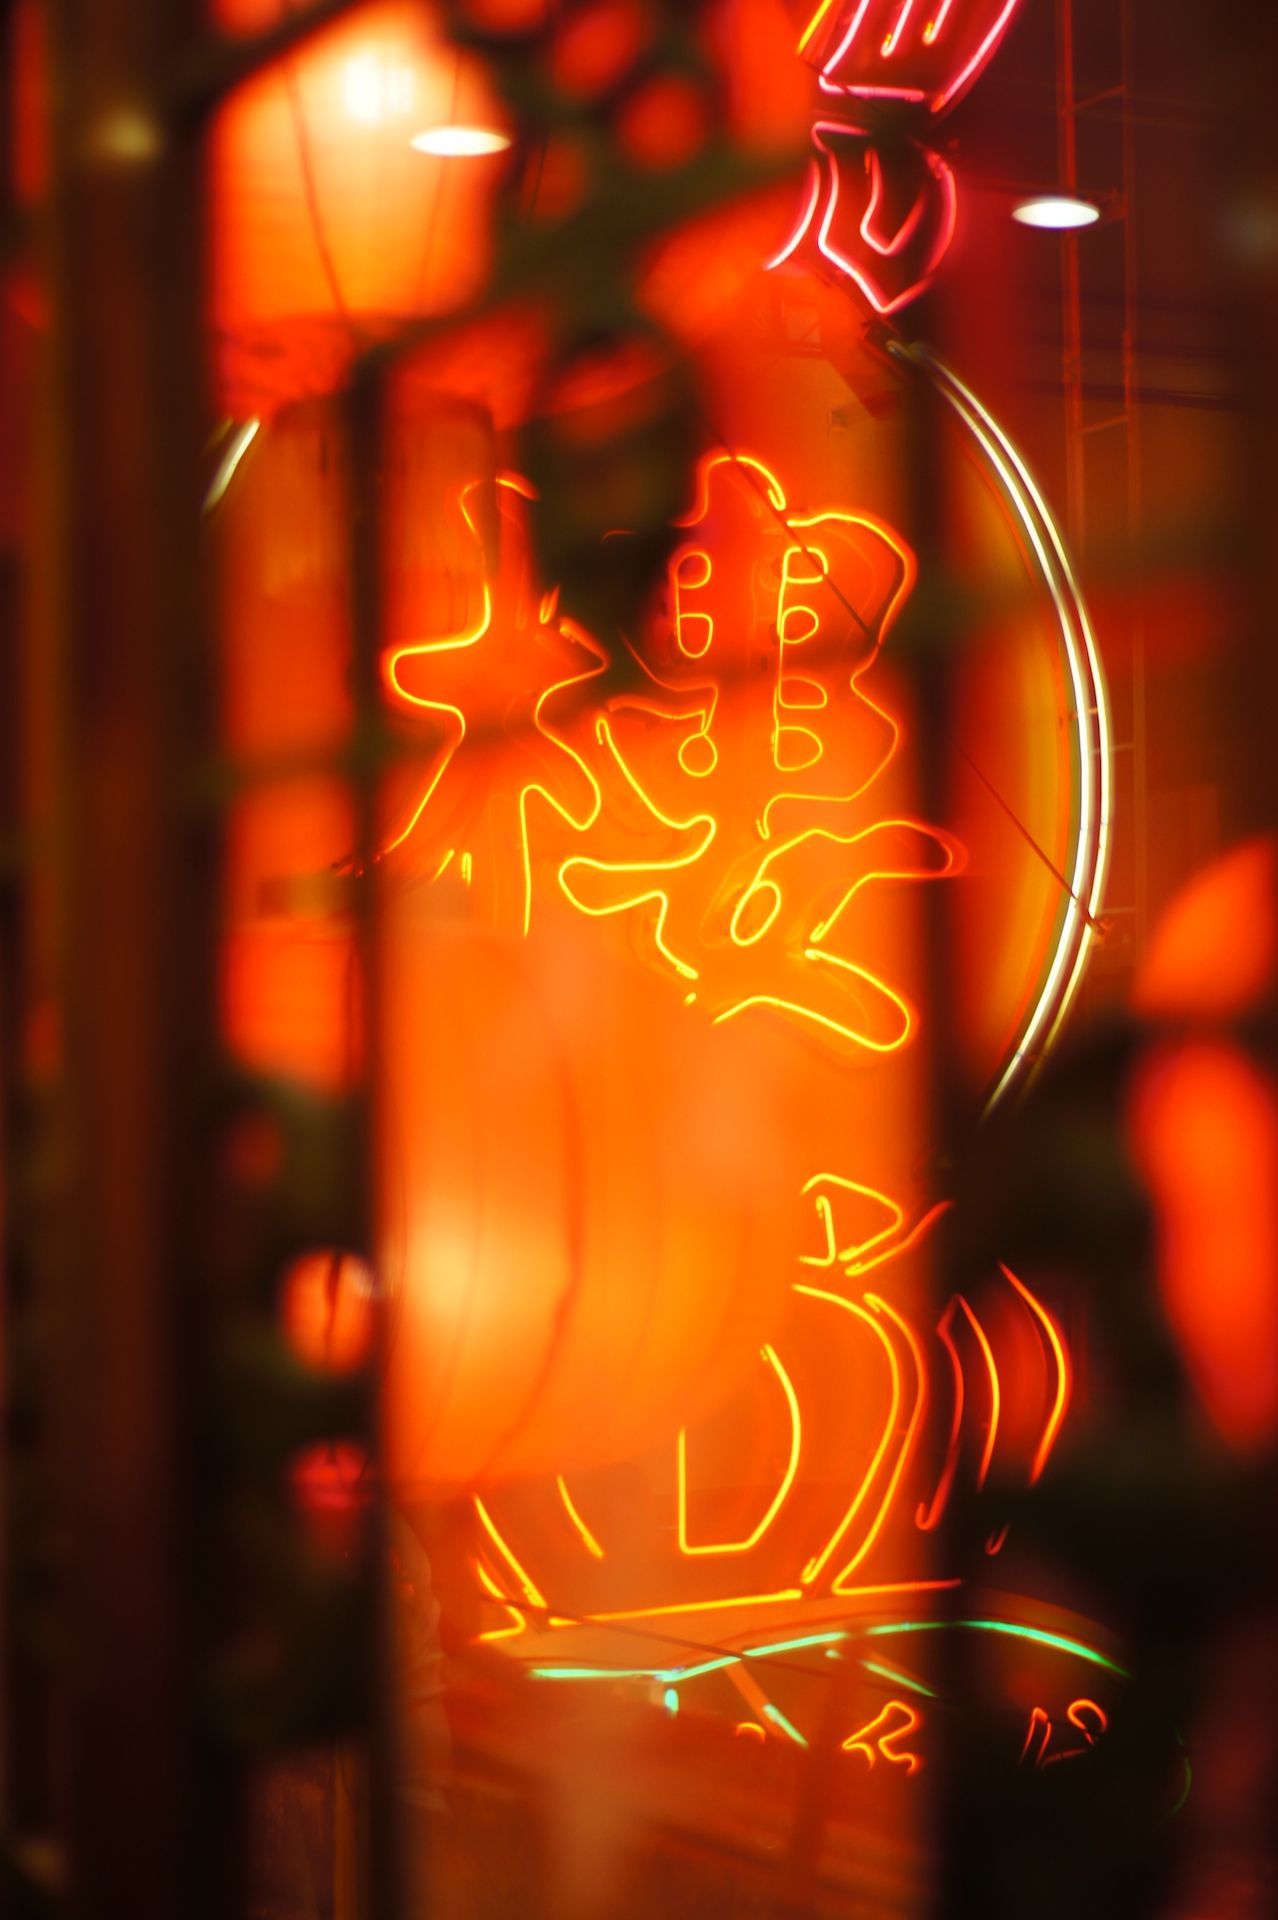 A neon sign of Chinese characters in a red glow. - Neon orange